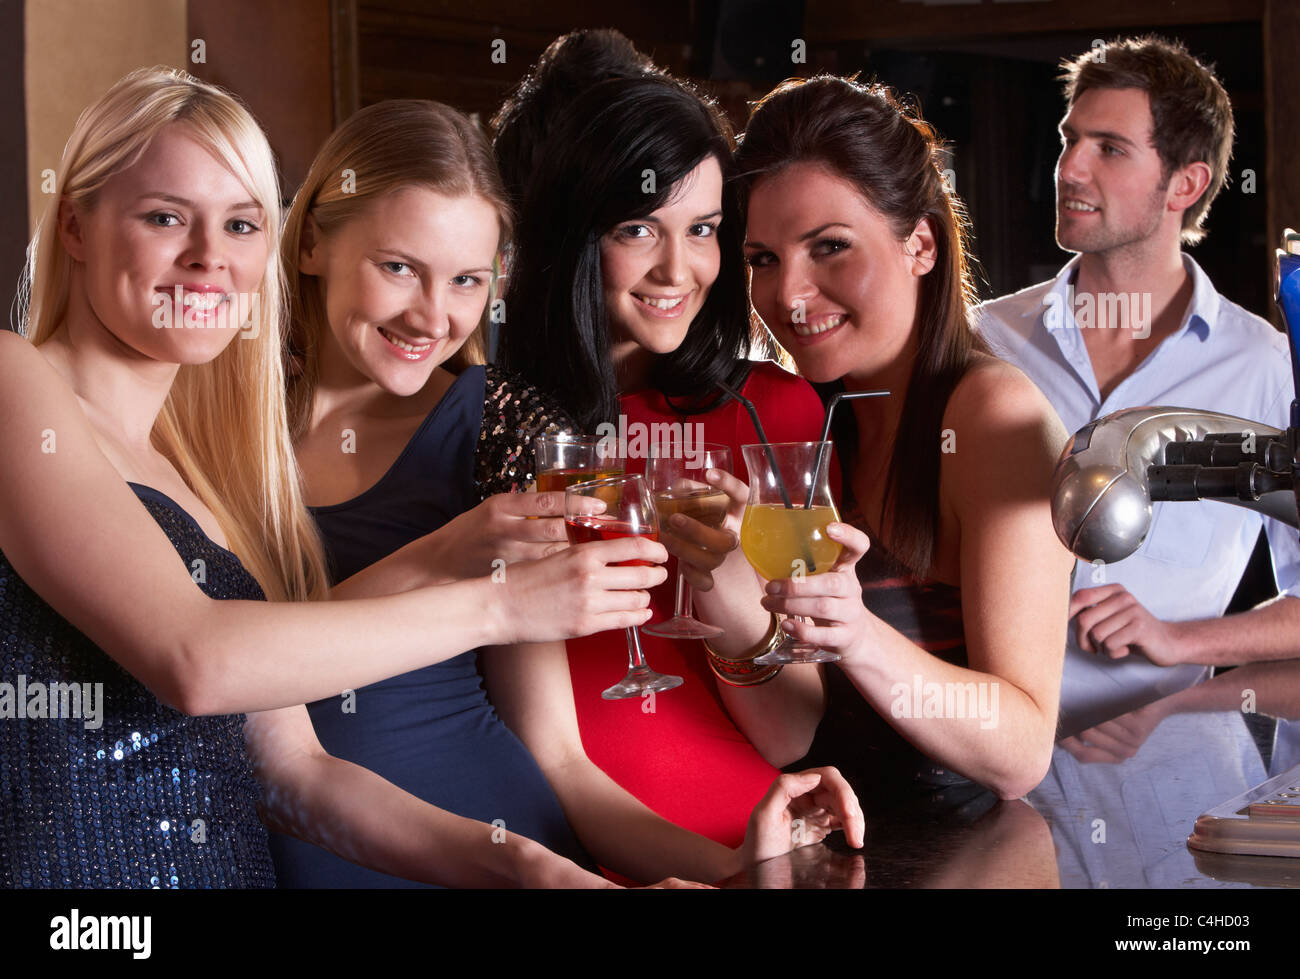 Young women drinking at bar Stock Photo